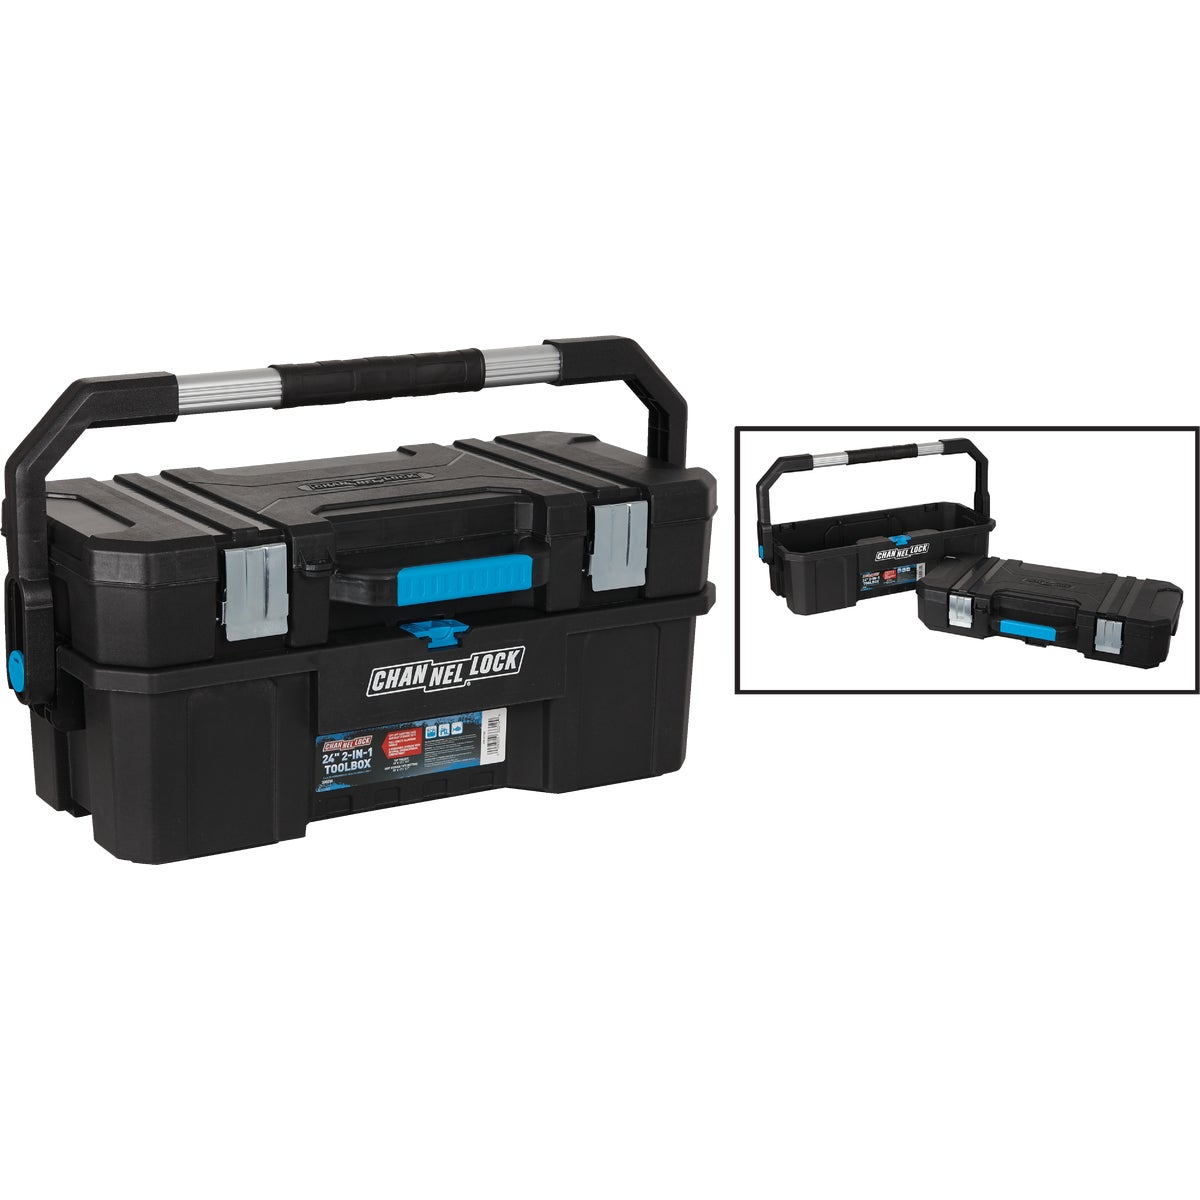 Channellock 24 In. 2-in-1 Toolbox